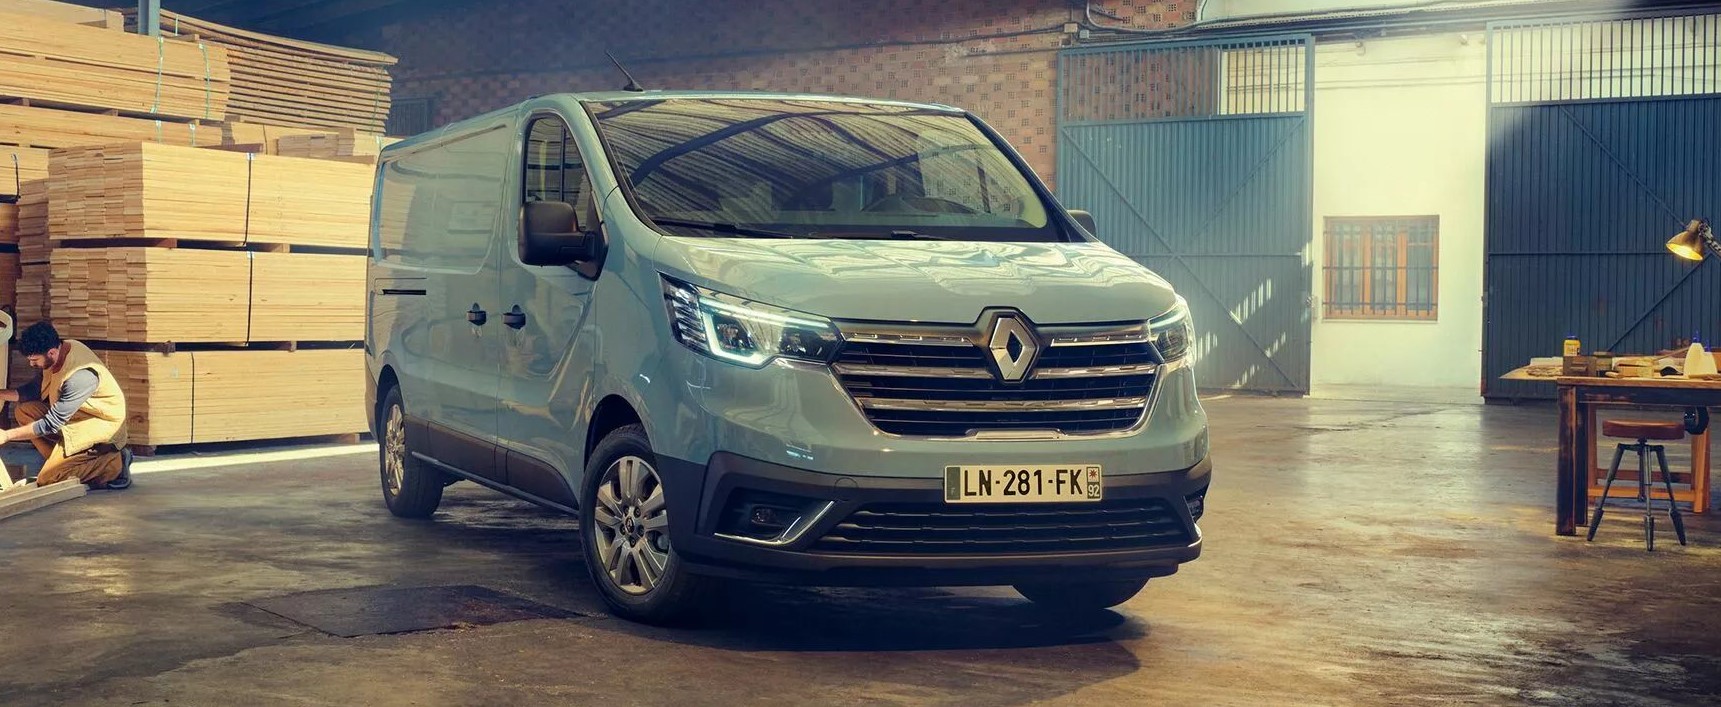 The Renault Trafic Review